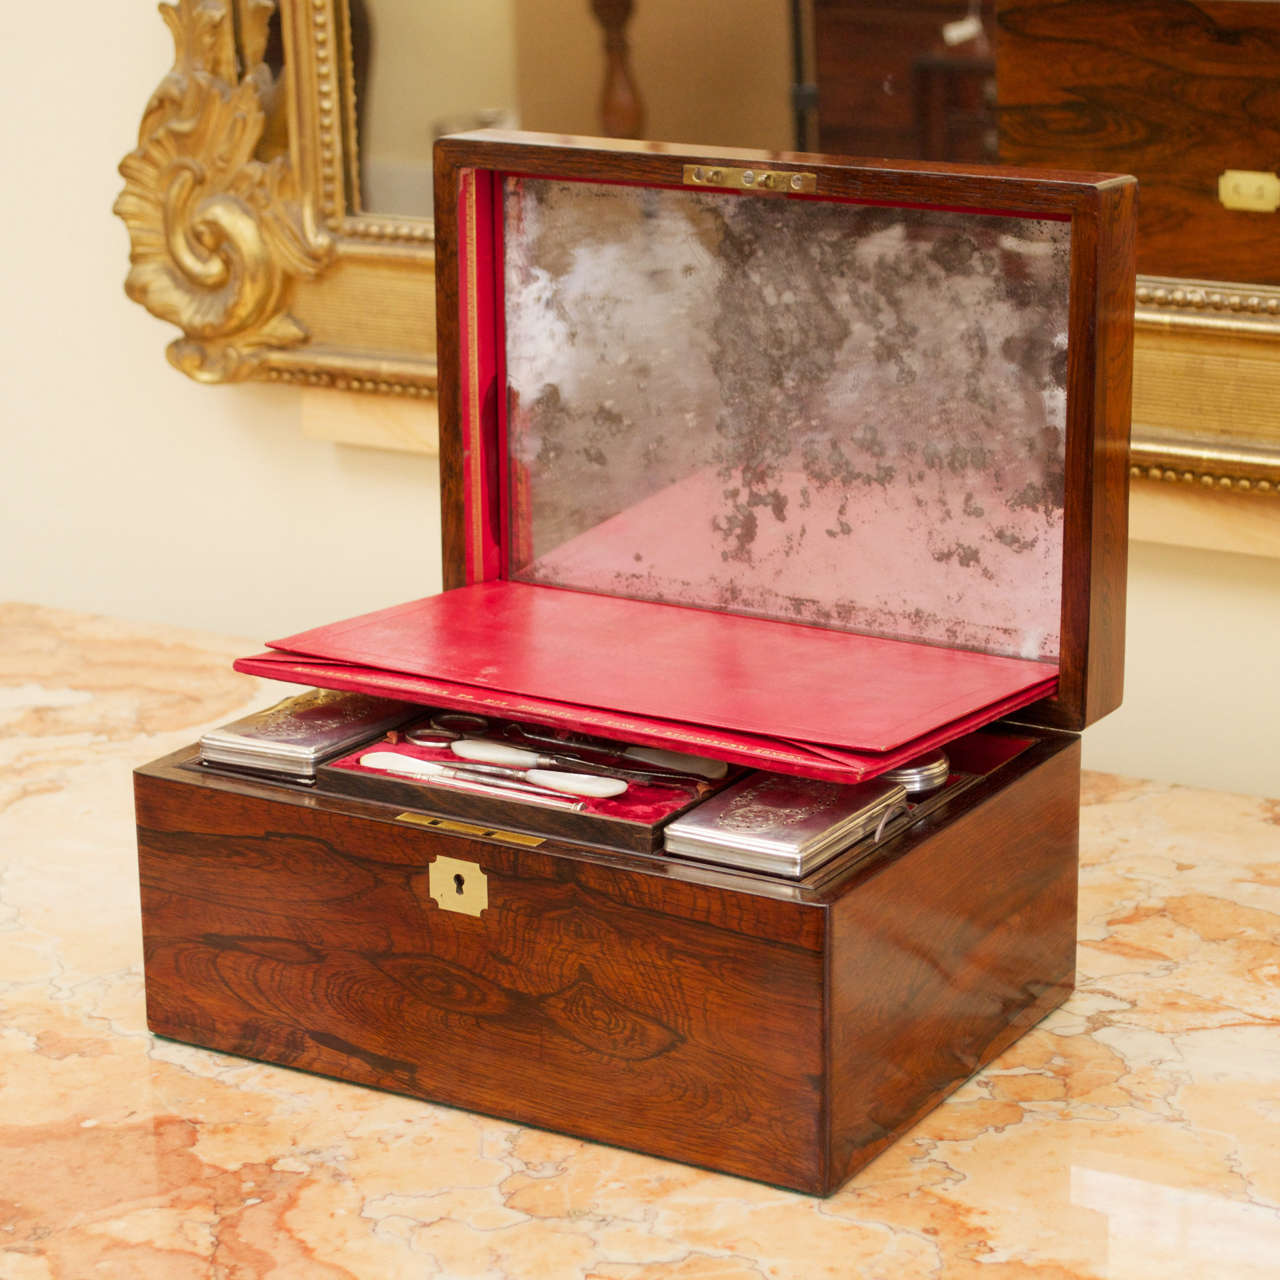 A gorgeous Victorian mahogany dressing box by Edwards with fitted interior. Hidden under the velvet cover is a removable easel mirror and leather stationery compartment embossed with 